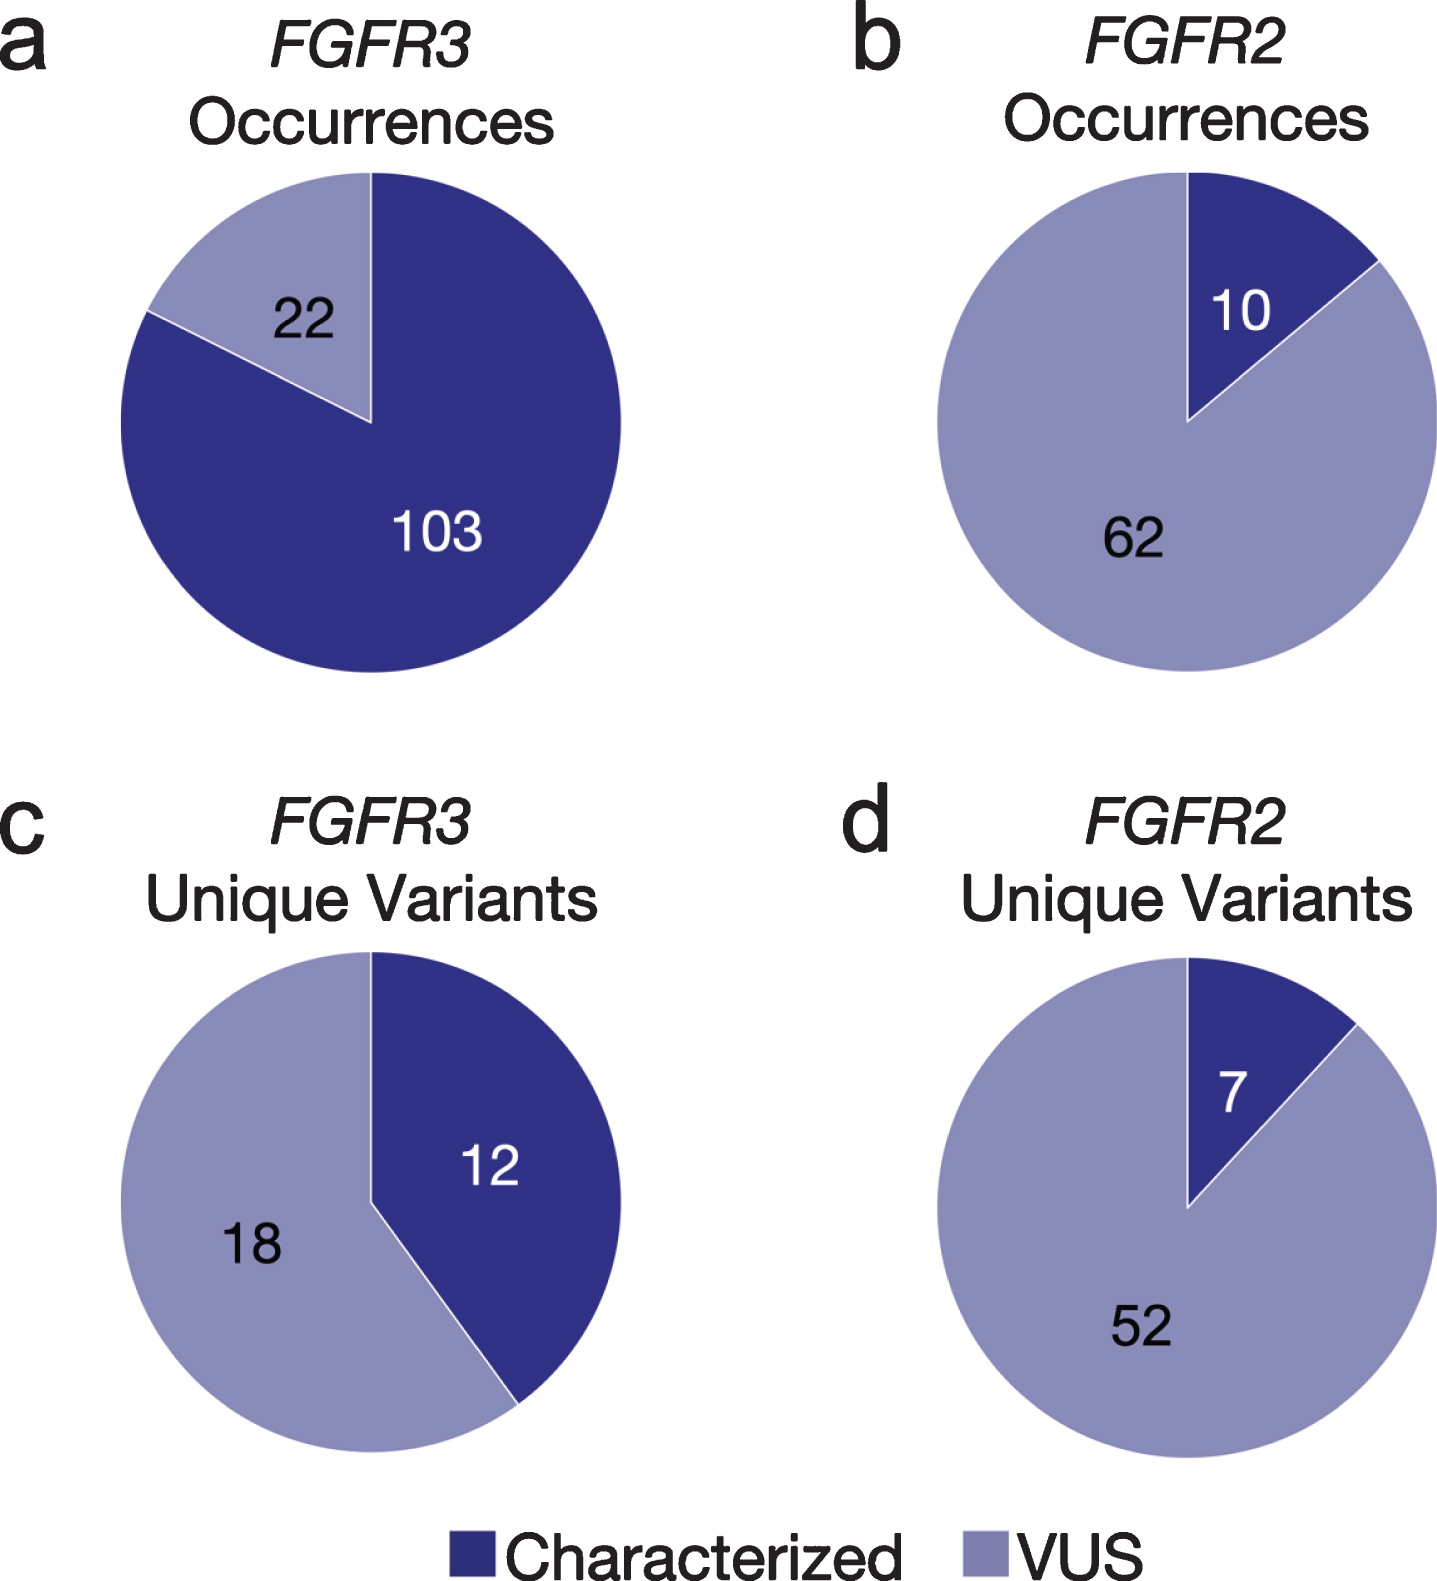 
Fig 1 Occurrences and unique variants in FGFR2/3. The number and proportion of both characterized and VUS GAs observed in cfDNA in FGFR3 (a) and FGFR2 (b) across the aUC cohort. Excluding occurrences of the same variant seen in multiple patients, the number and proportion of both characterized and VUS unique variants present in FGFR3 (c) and FGFR2 (d) across the cfDNA aUC cohort. VUS, variant of uncertain significance.